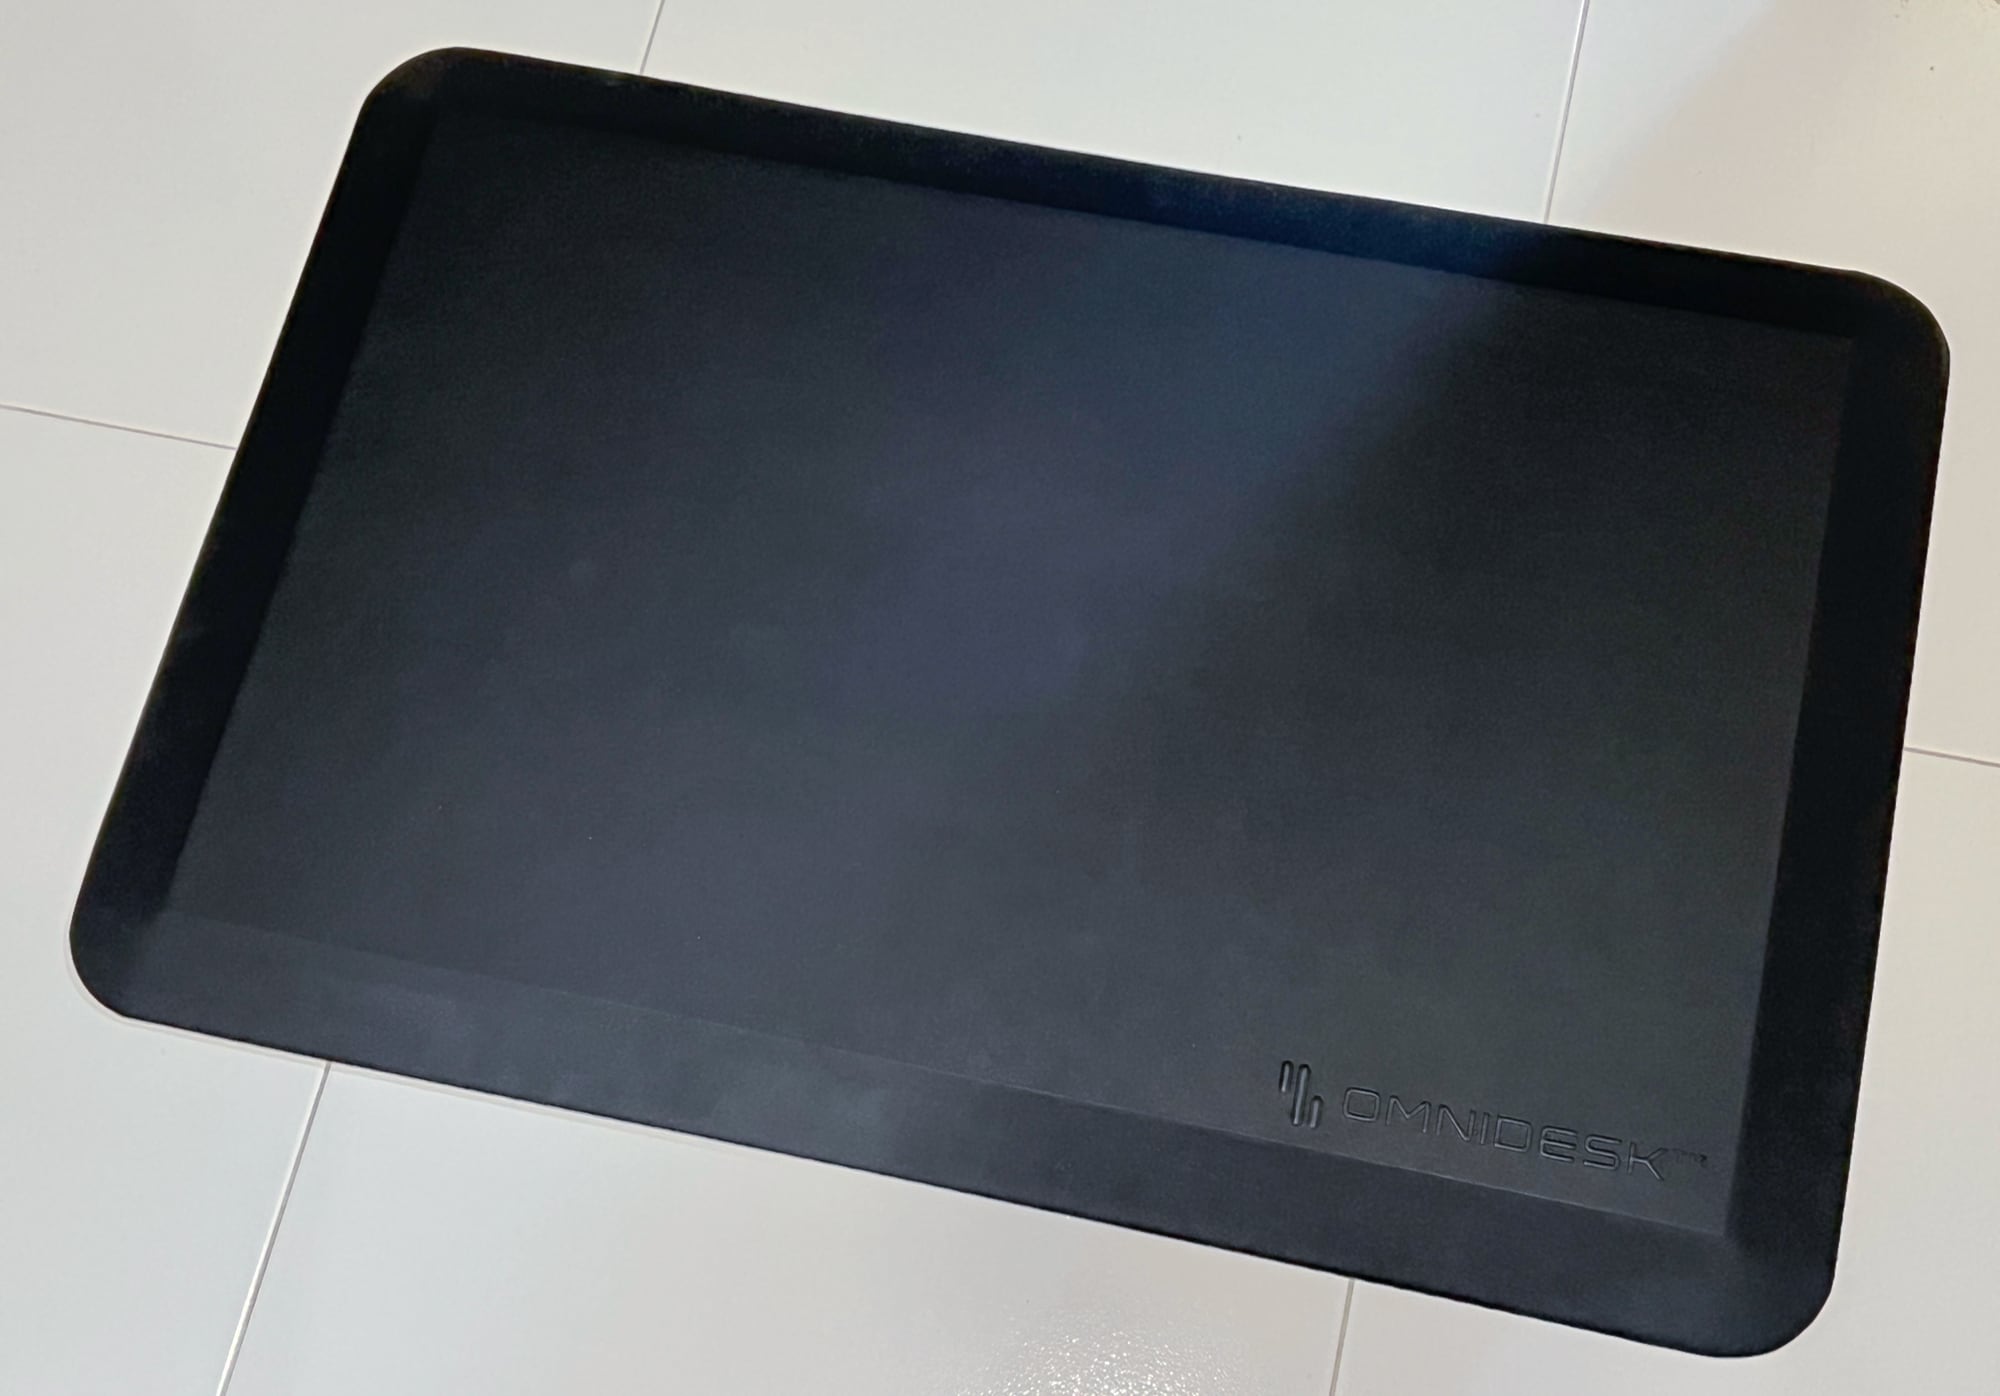 Omnidesk Altas review: The standing mat to get